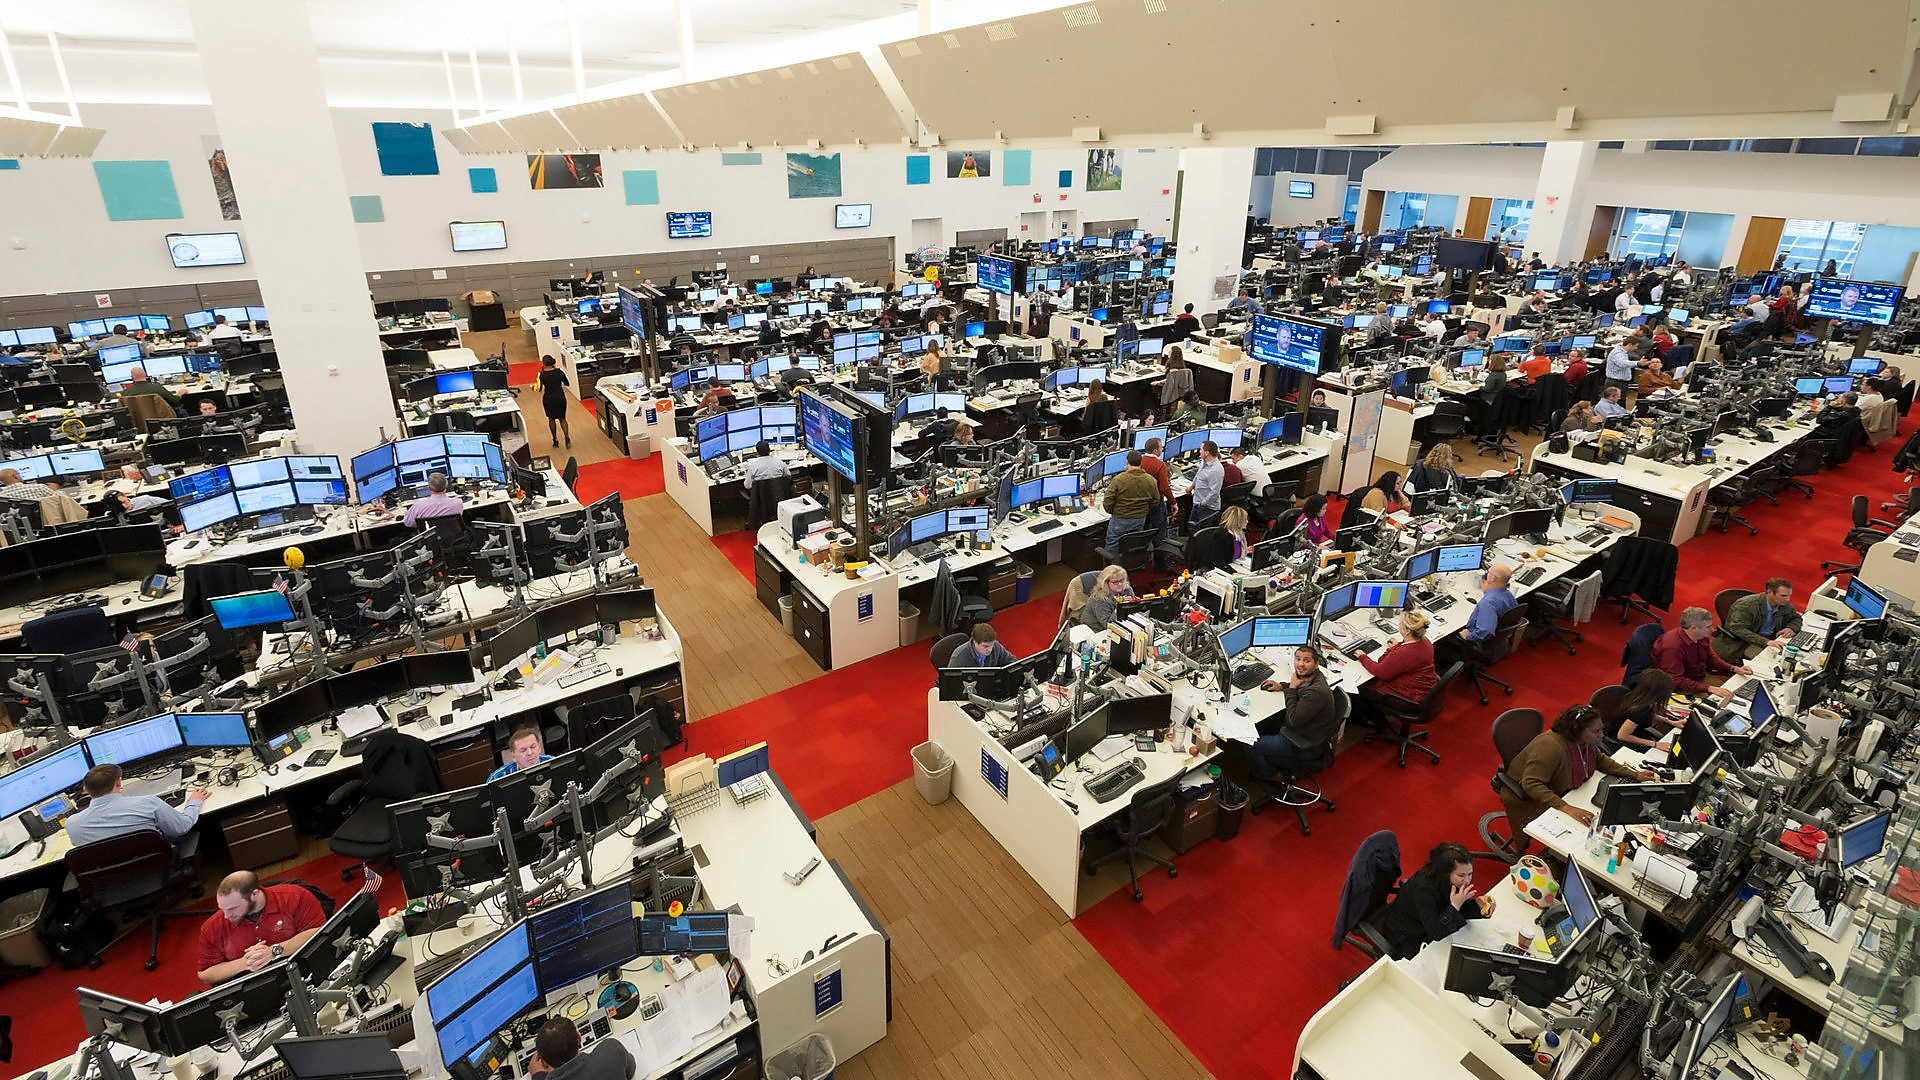 https://www.shell.us/careers/about-careers-at-shell/our-business-at-a-glance/trader-development-programme/_jcr_content/pagePromo/image.img.960.jpeg/1577812618123/busy-trading-floor.jpeg